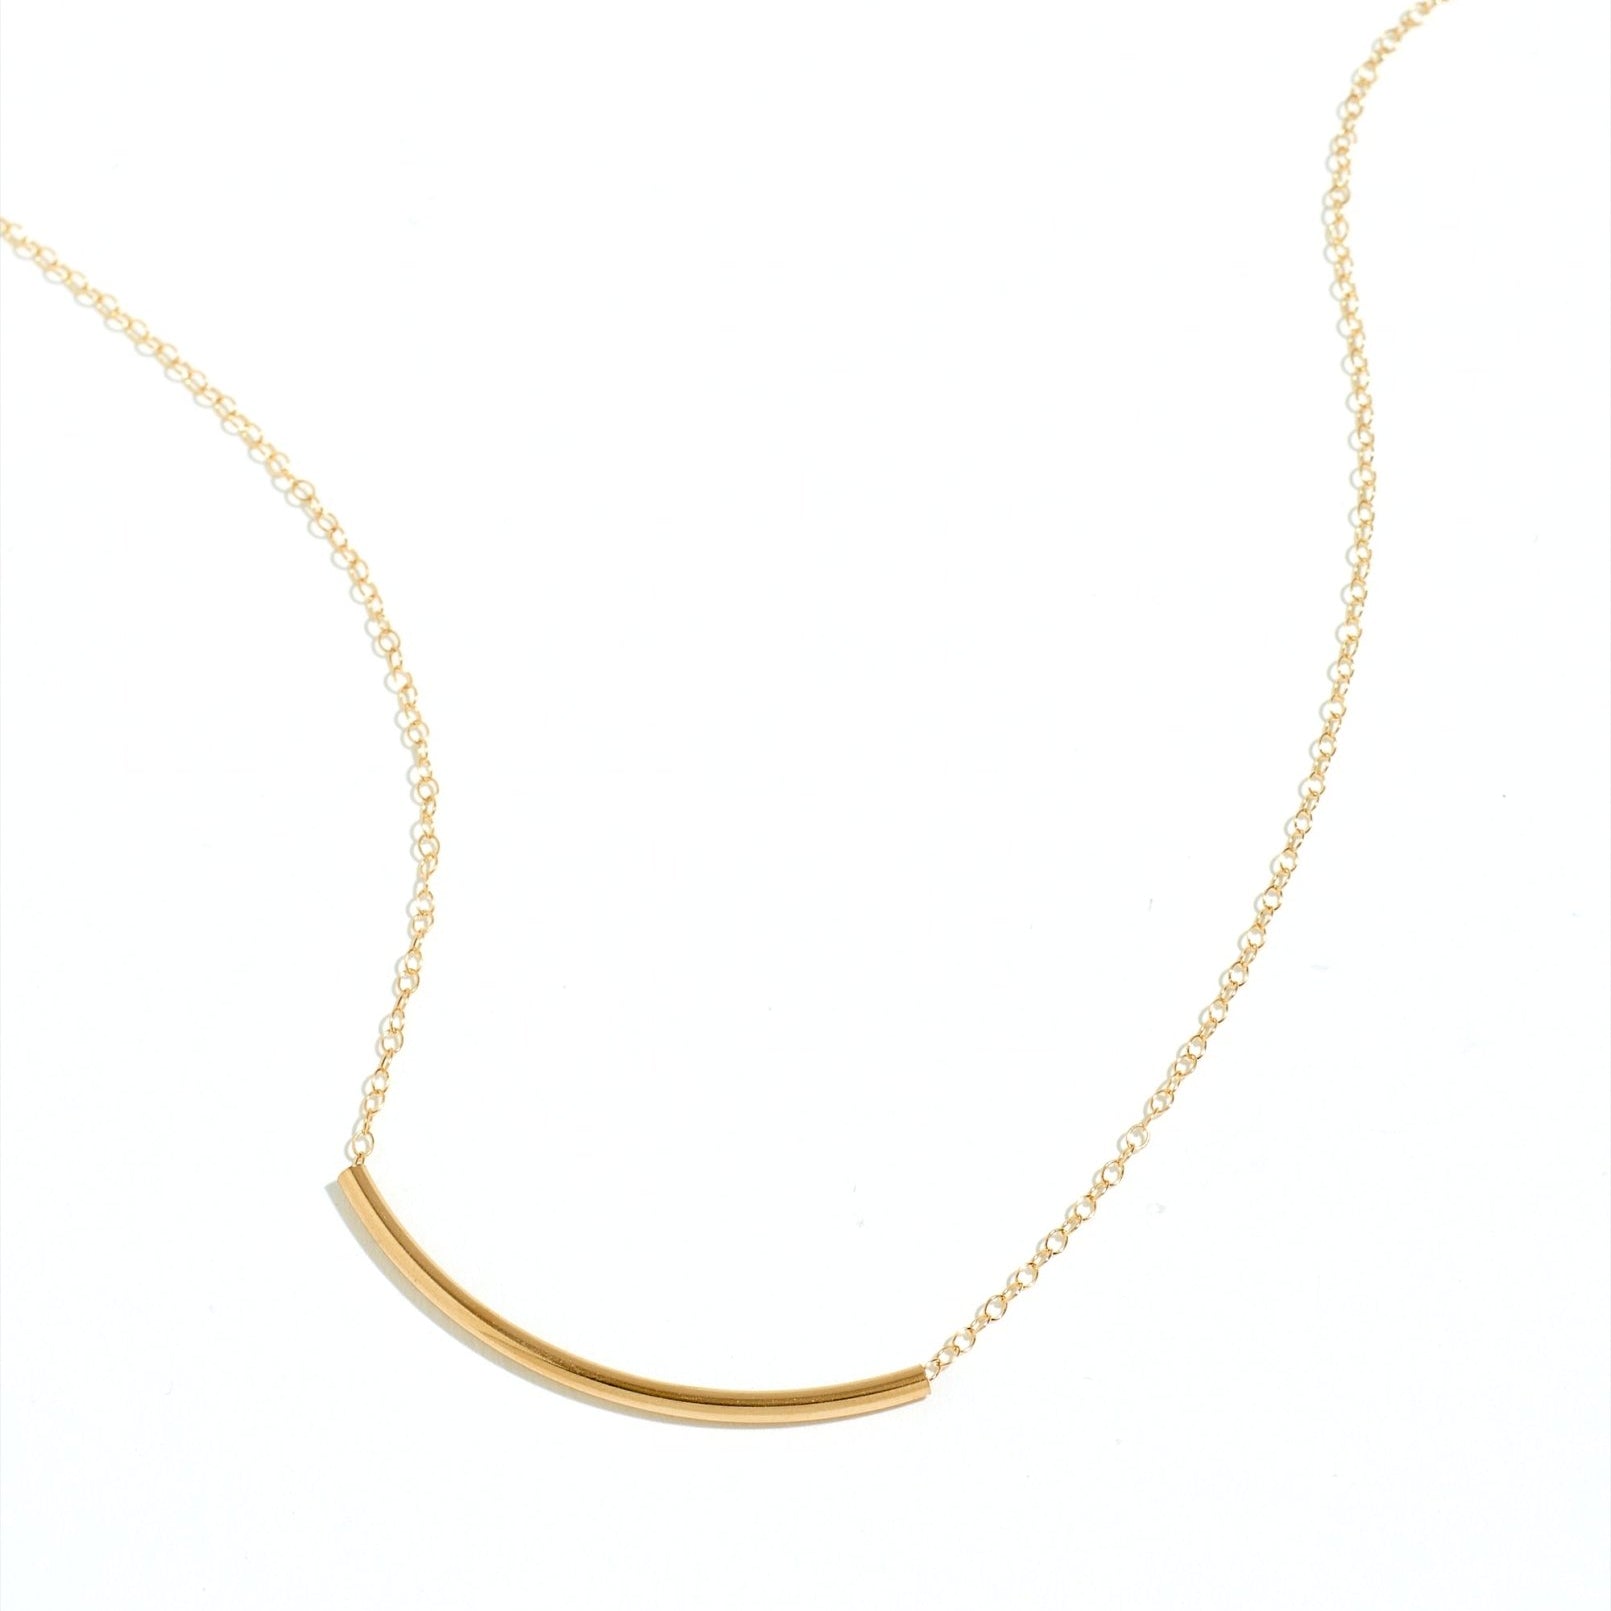 Get the Look: Our Bestselling Minimalist Jewelry on Madewell - Sheena Marshall